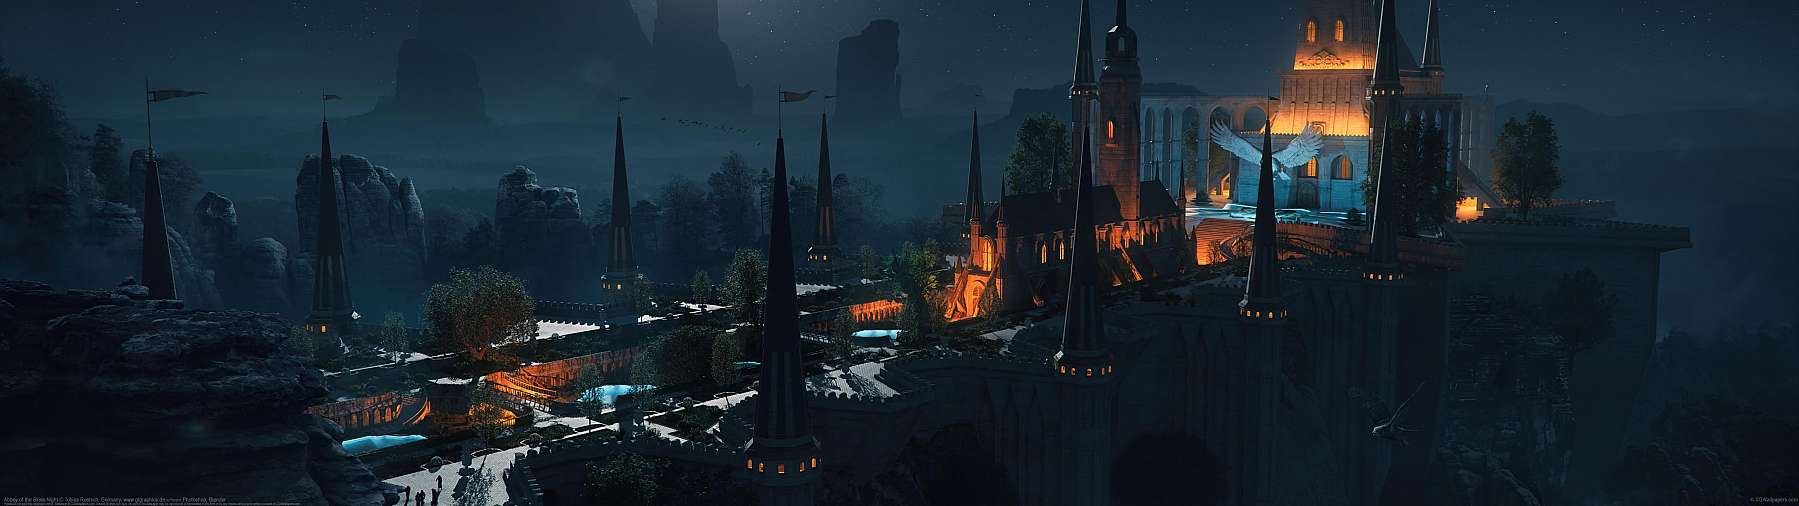 Abbey of the Skies Night ultrawide achtergrond